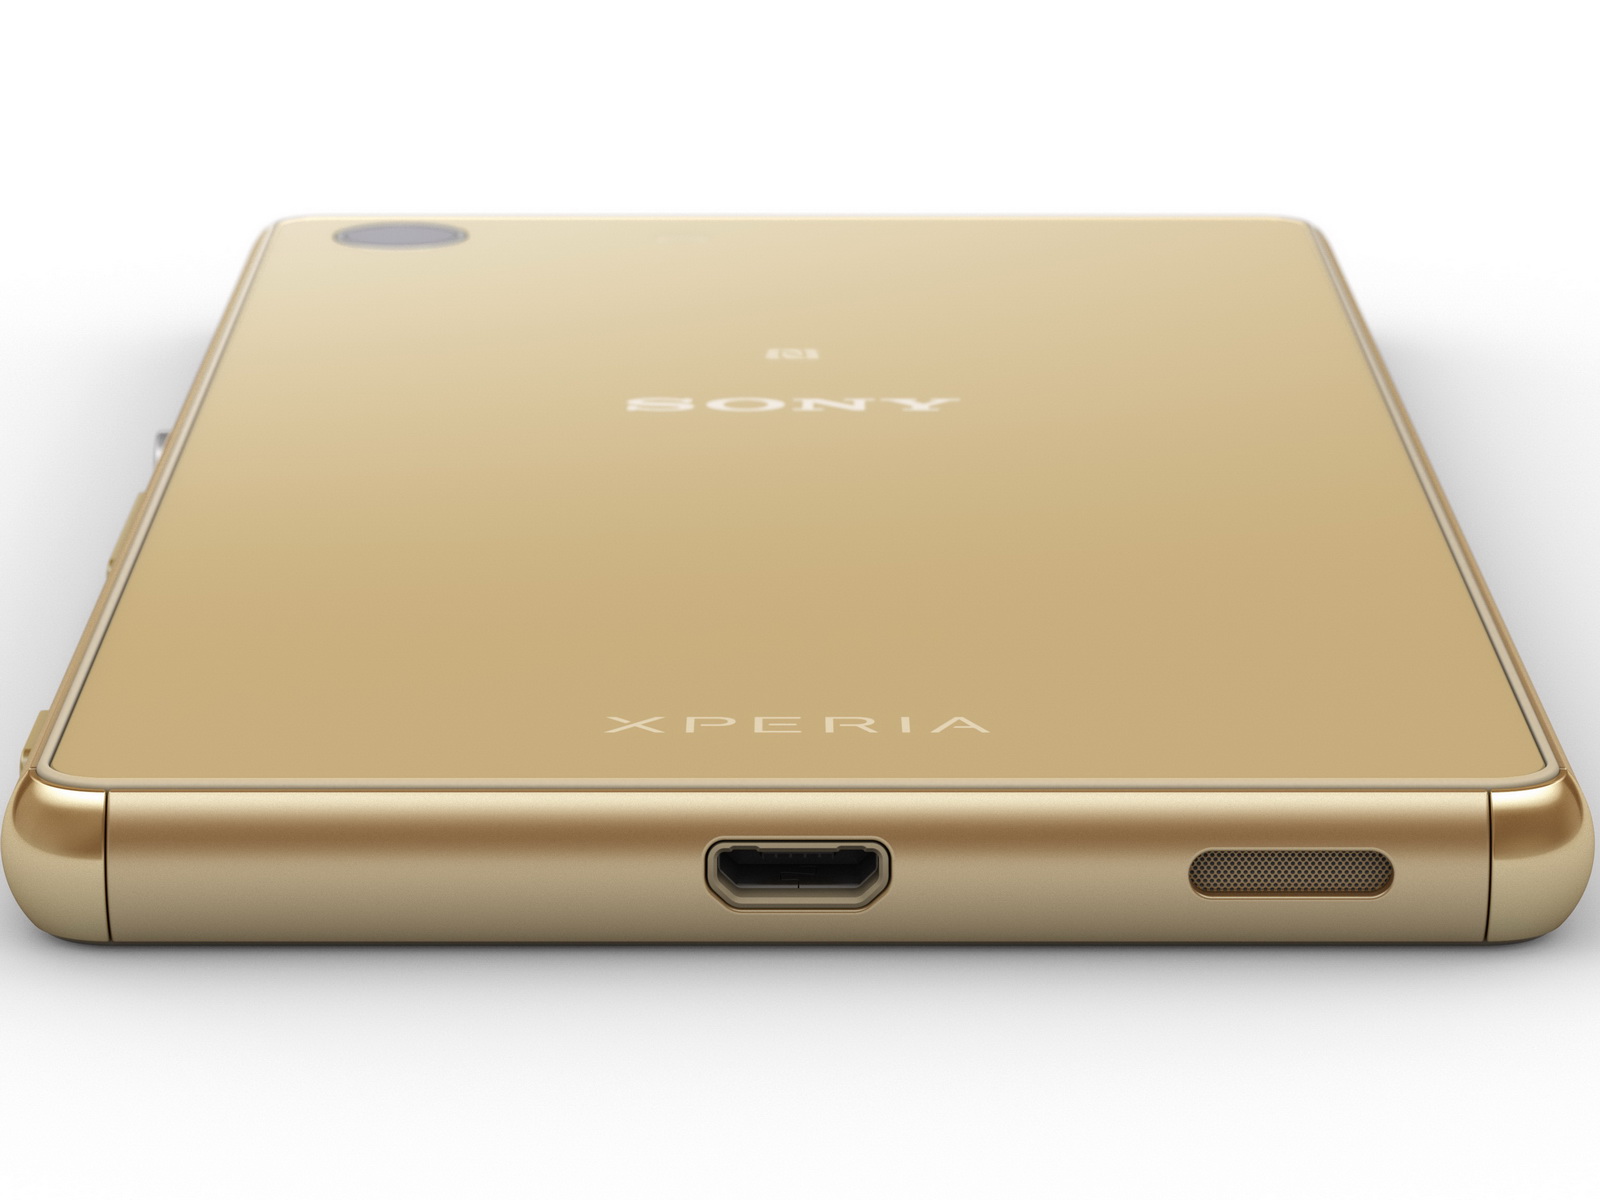 Previs site planter Smelten Sony Xperia M5 coming this month for 400 Euros - NotebookCheck.net News